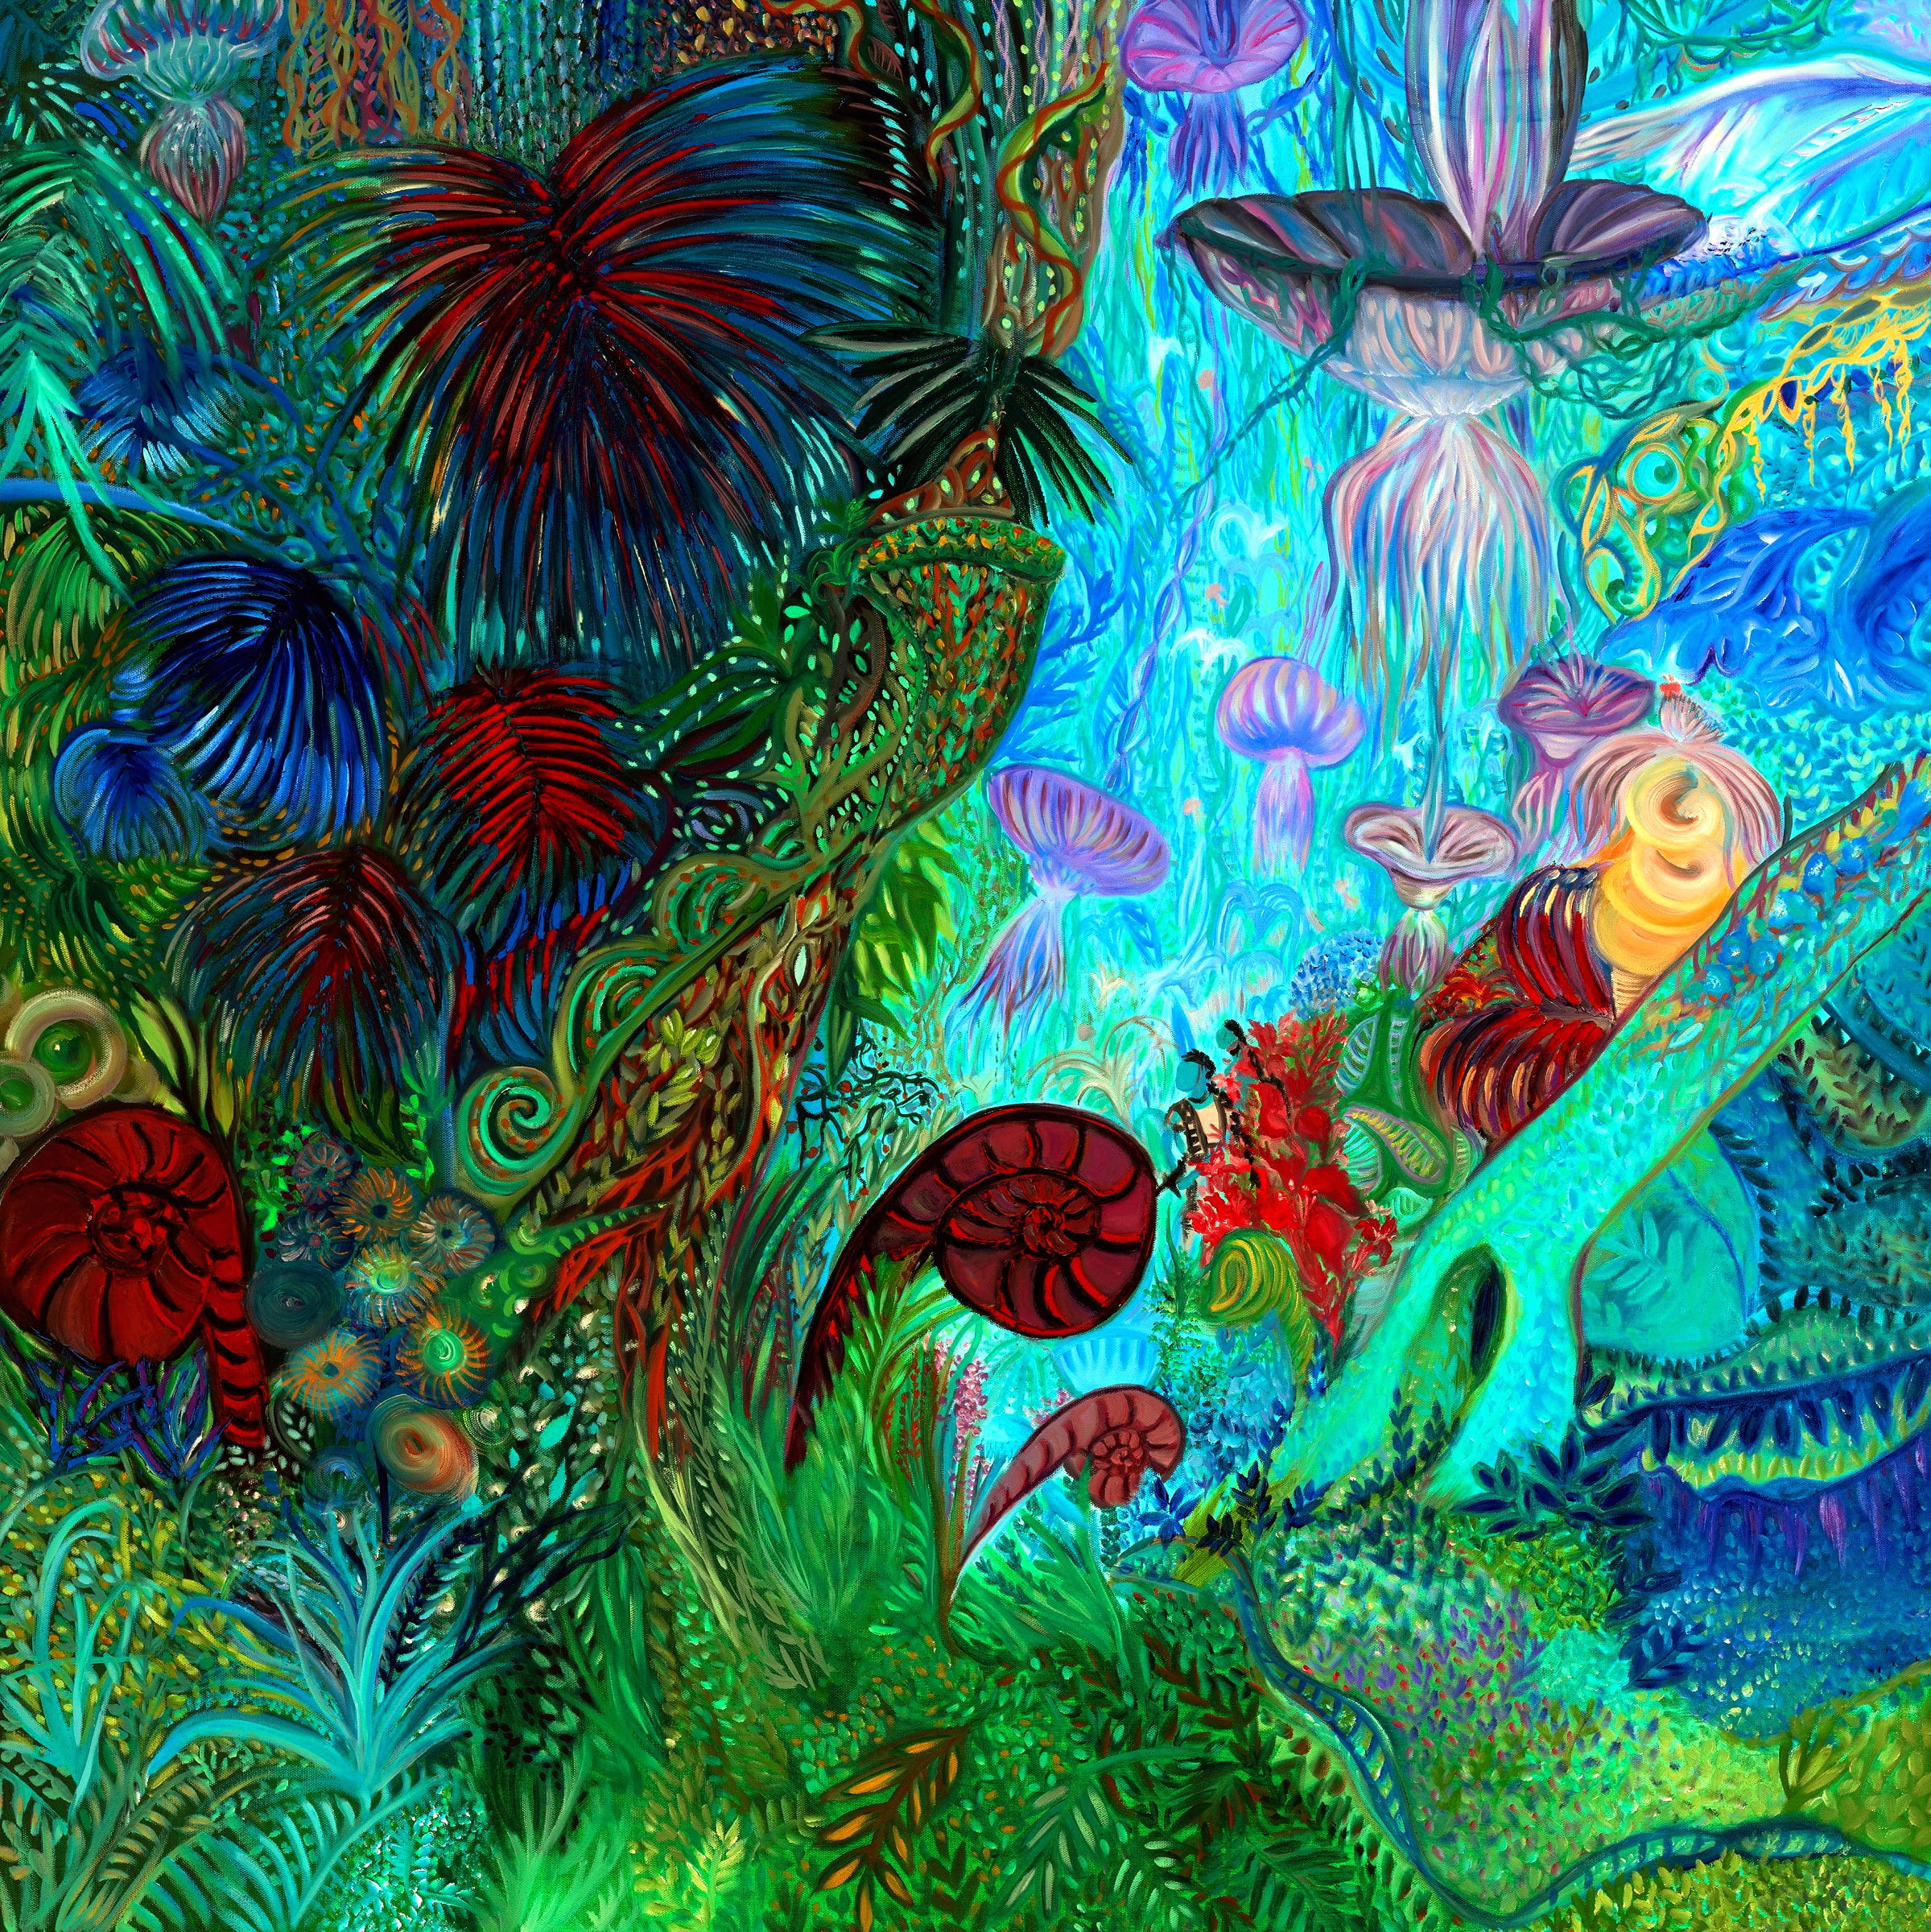 The rainforest has evolved, and in doing so, has converged with the ocean reef. Bioluminescent species cast a surreal underwater glow. Fiddleheads curl into themselves like nautiloids. Fleshy palm fronds fan outward from bulbous stems like sea anemones. Fungal spirits bob gently upon the breeze, their shaggy mycelia dangling like tentacles from bowl-shaped caps. The arc of a lichen-covered branch scaffolds the ecosystem like coral.